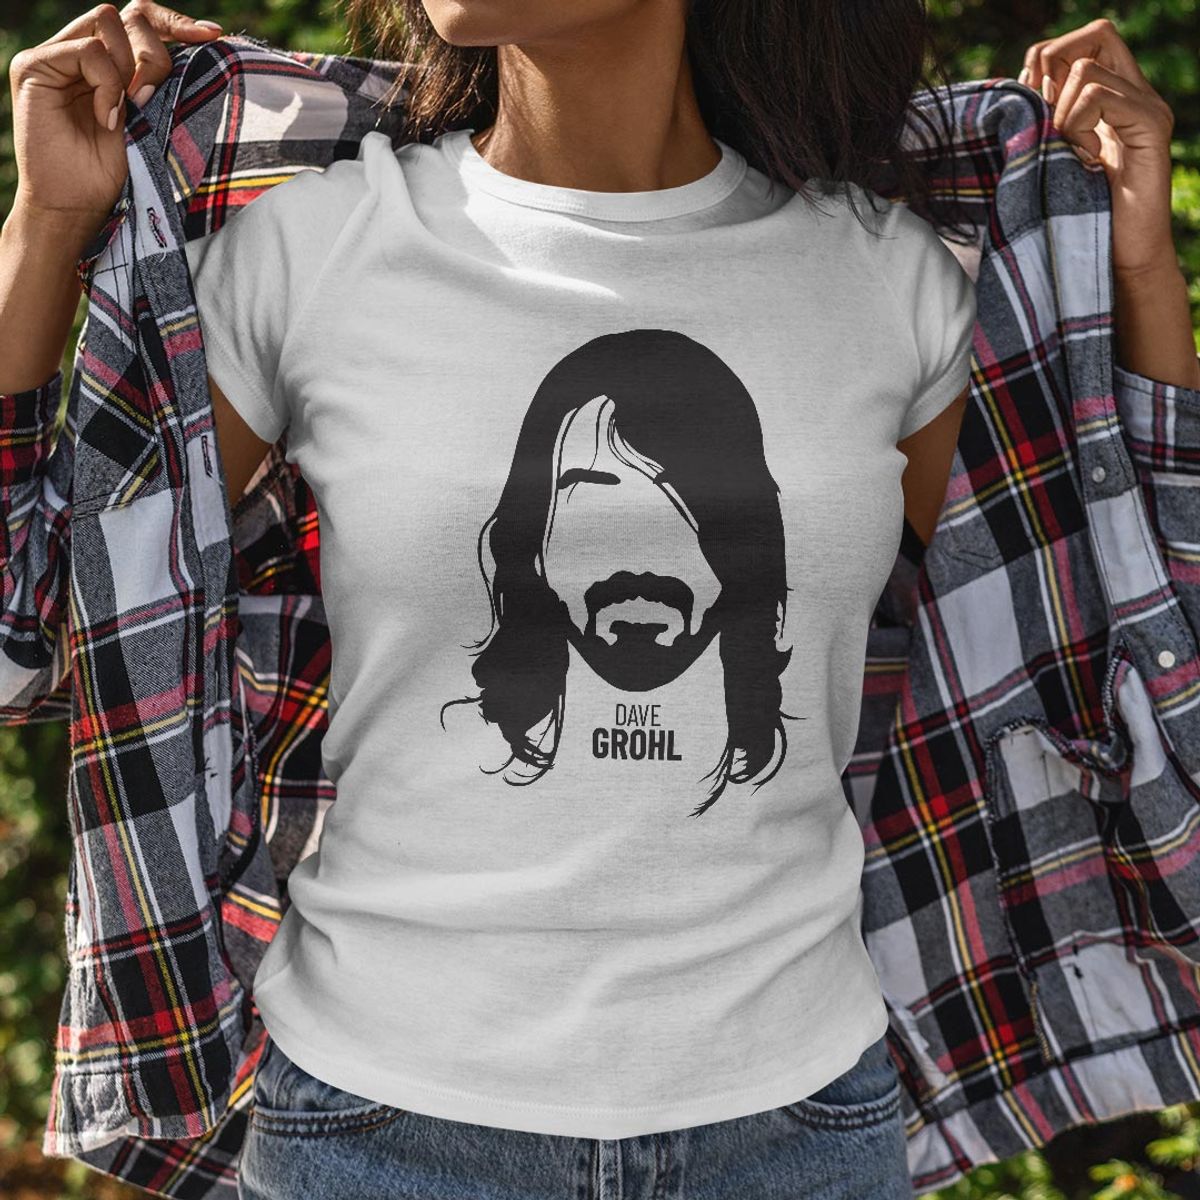 Nome do produto: BABY LOOK - DAVE GROHL